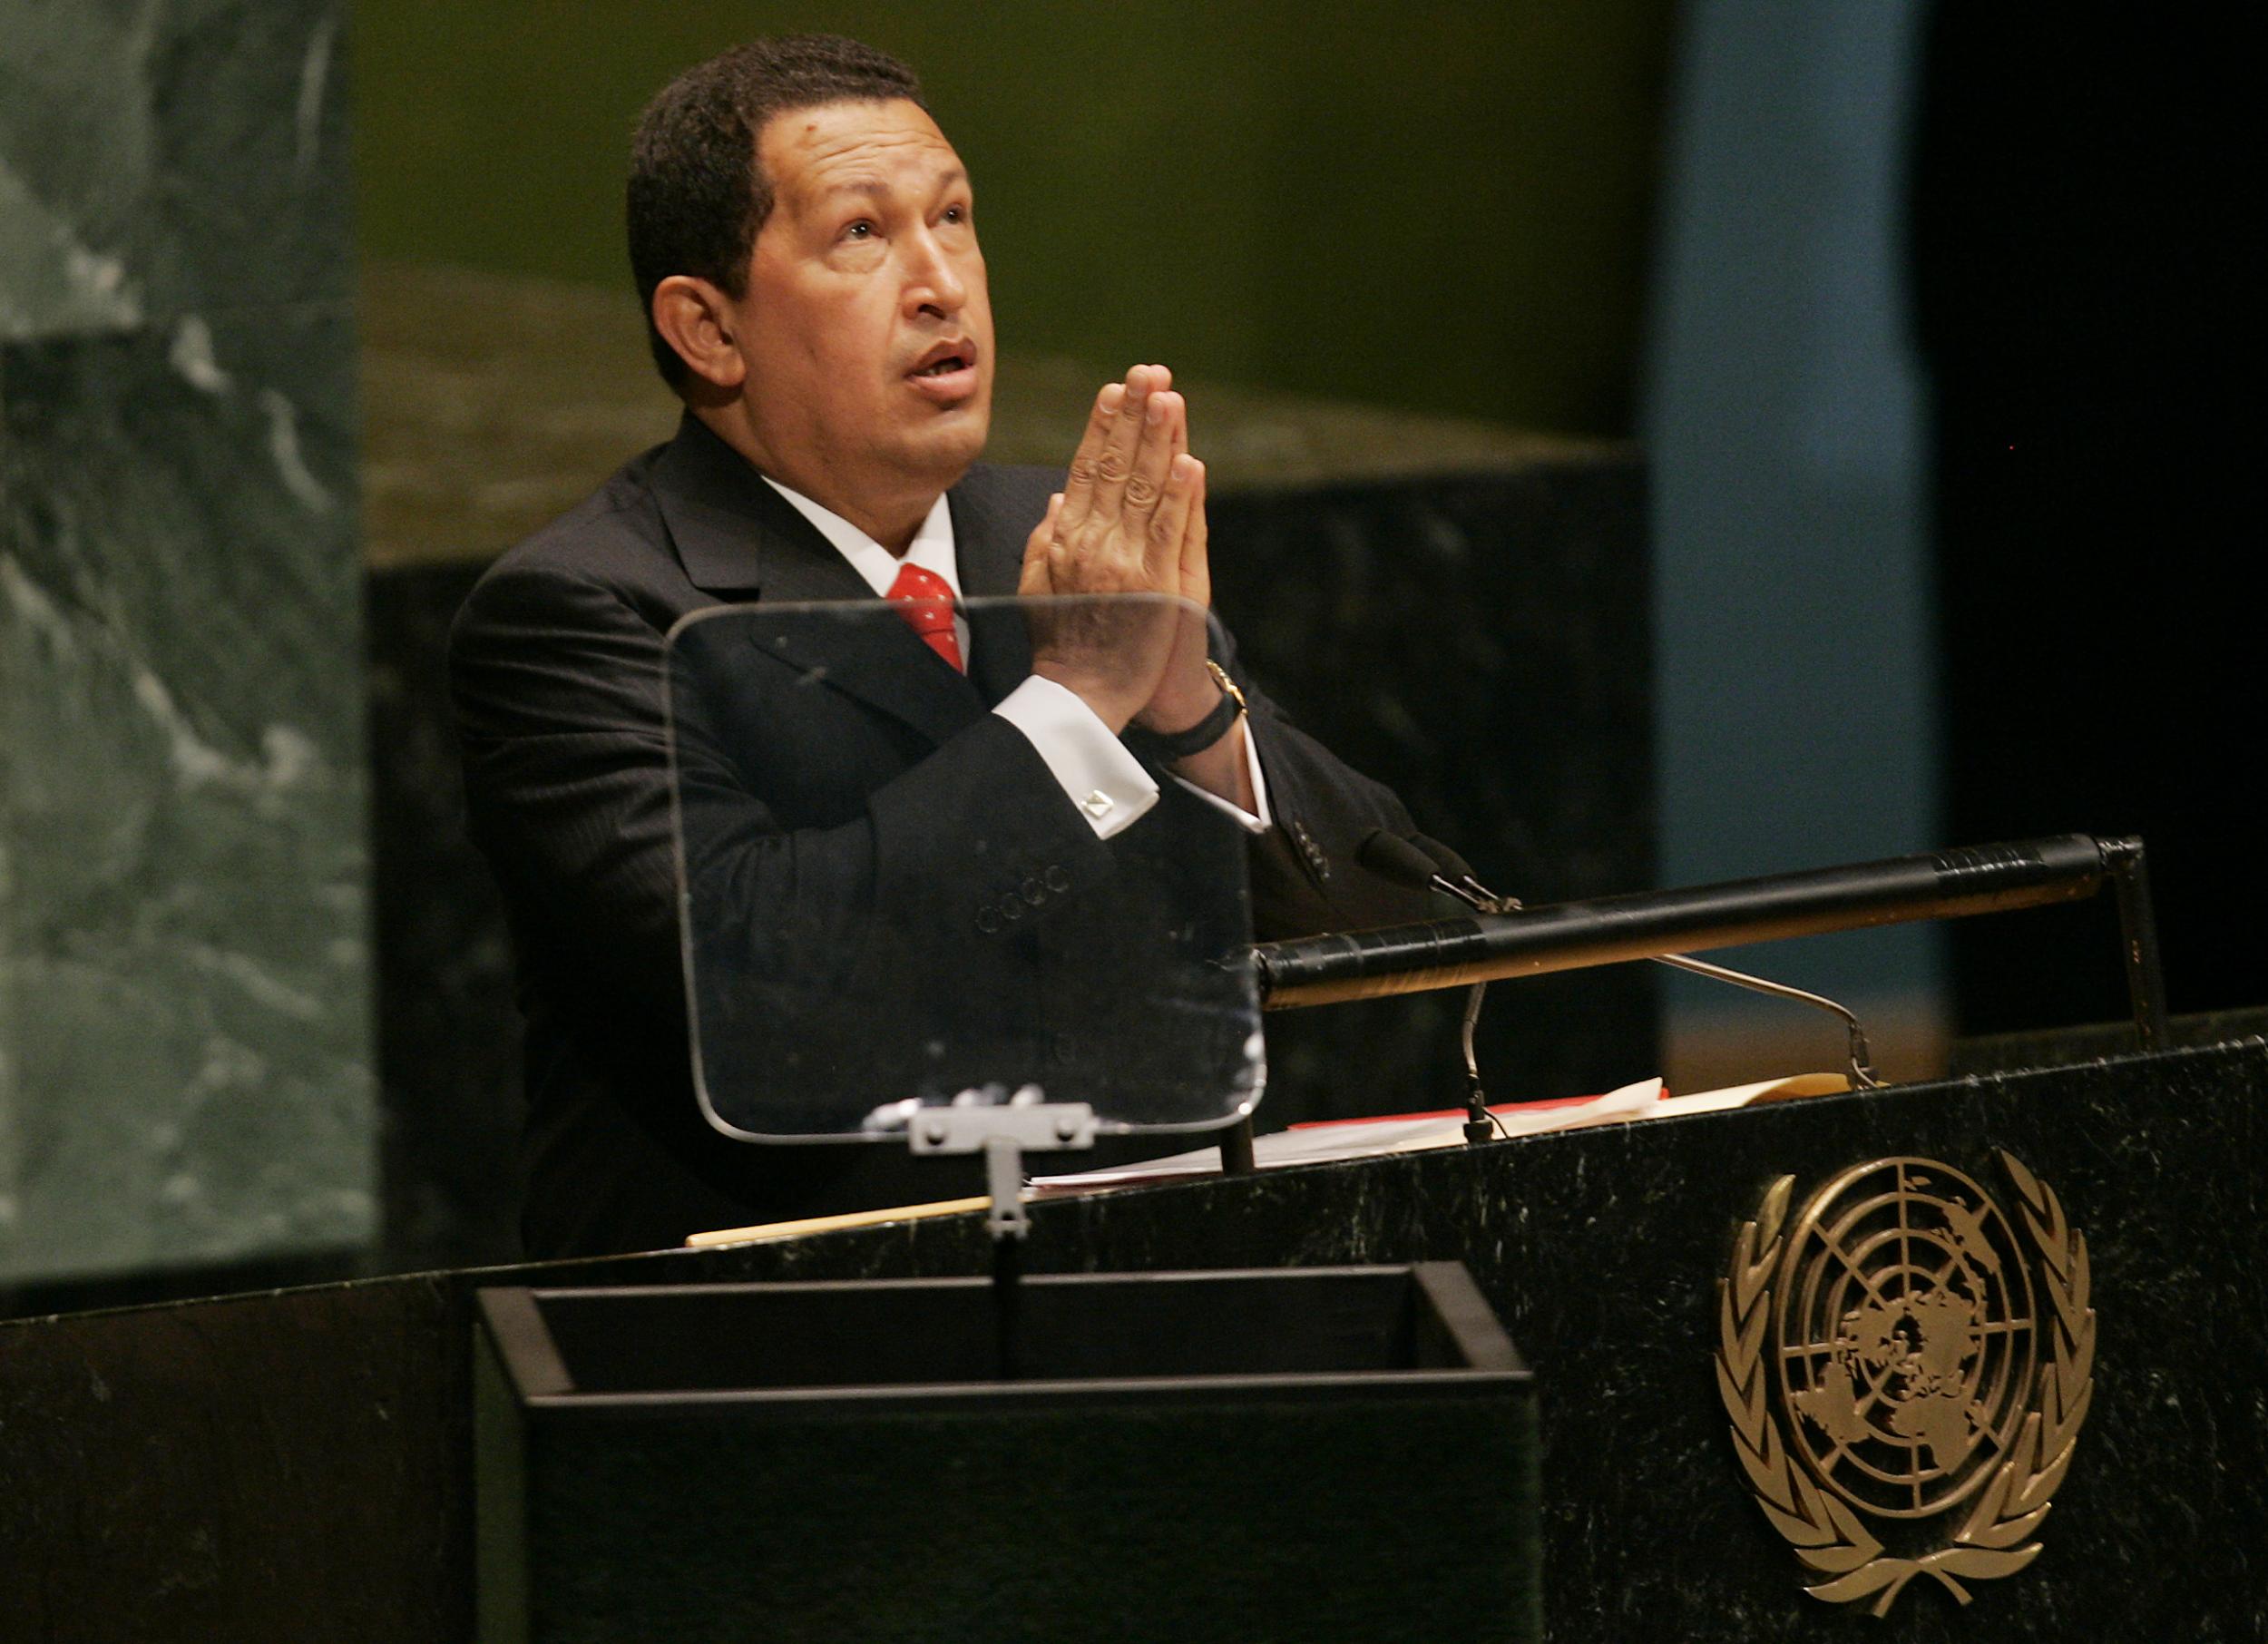 Venezuela president Hugo Chavez at the United Nations general assembly in 2006